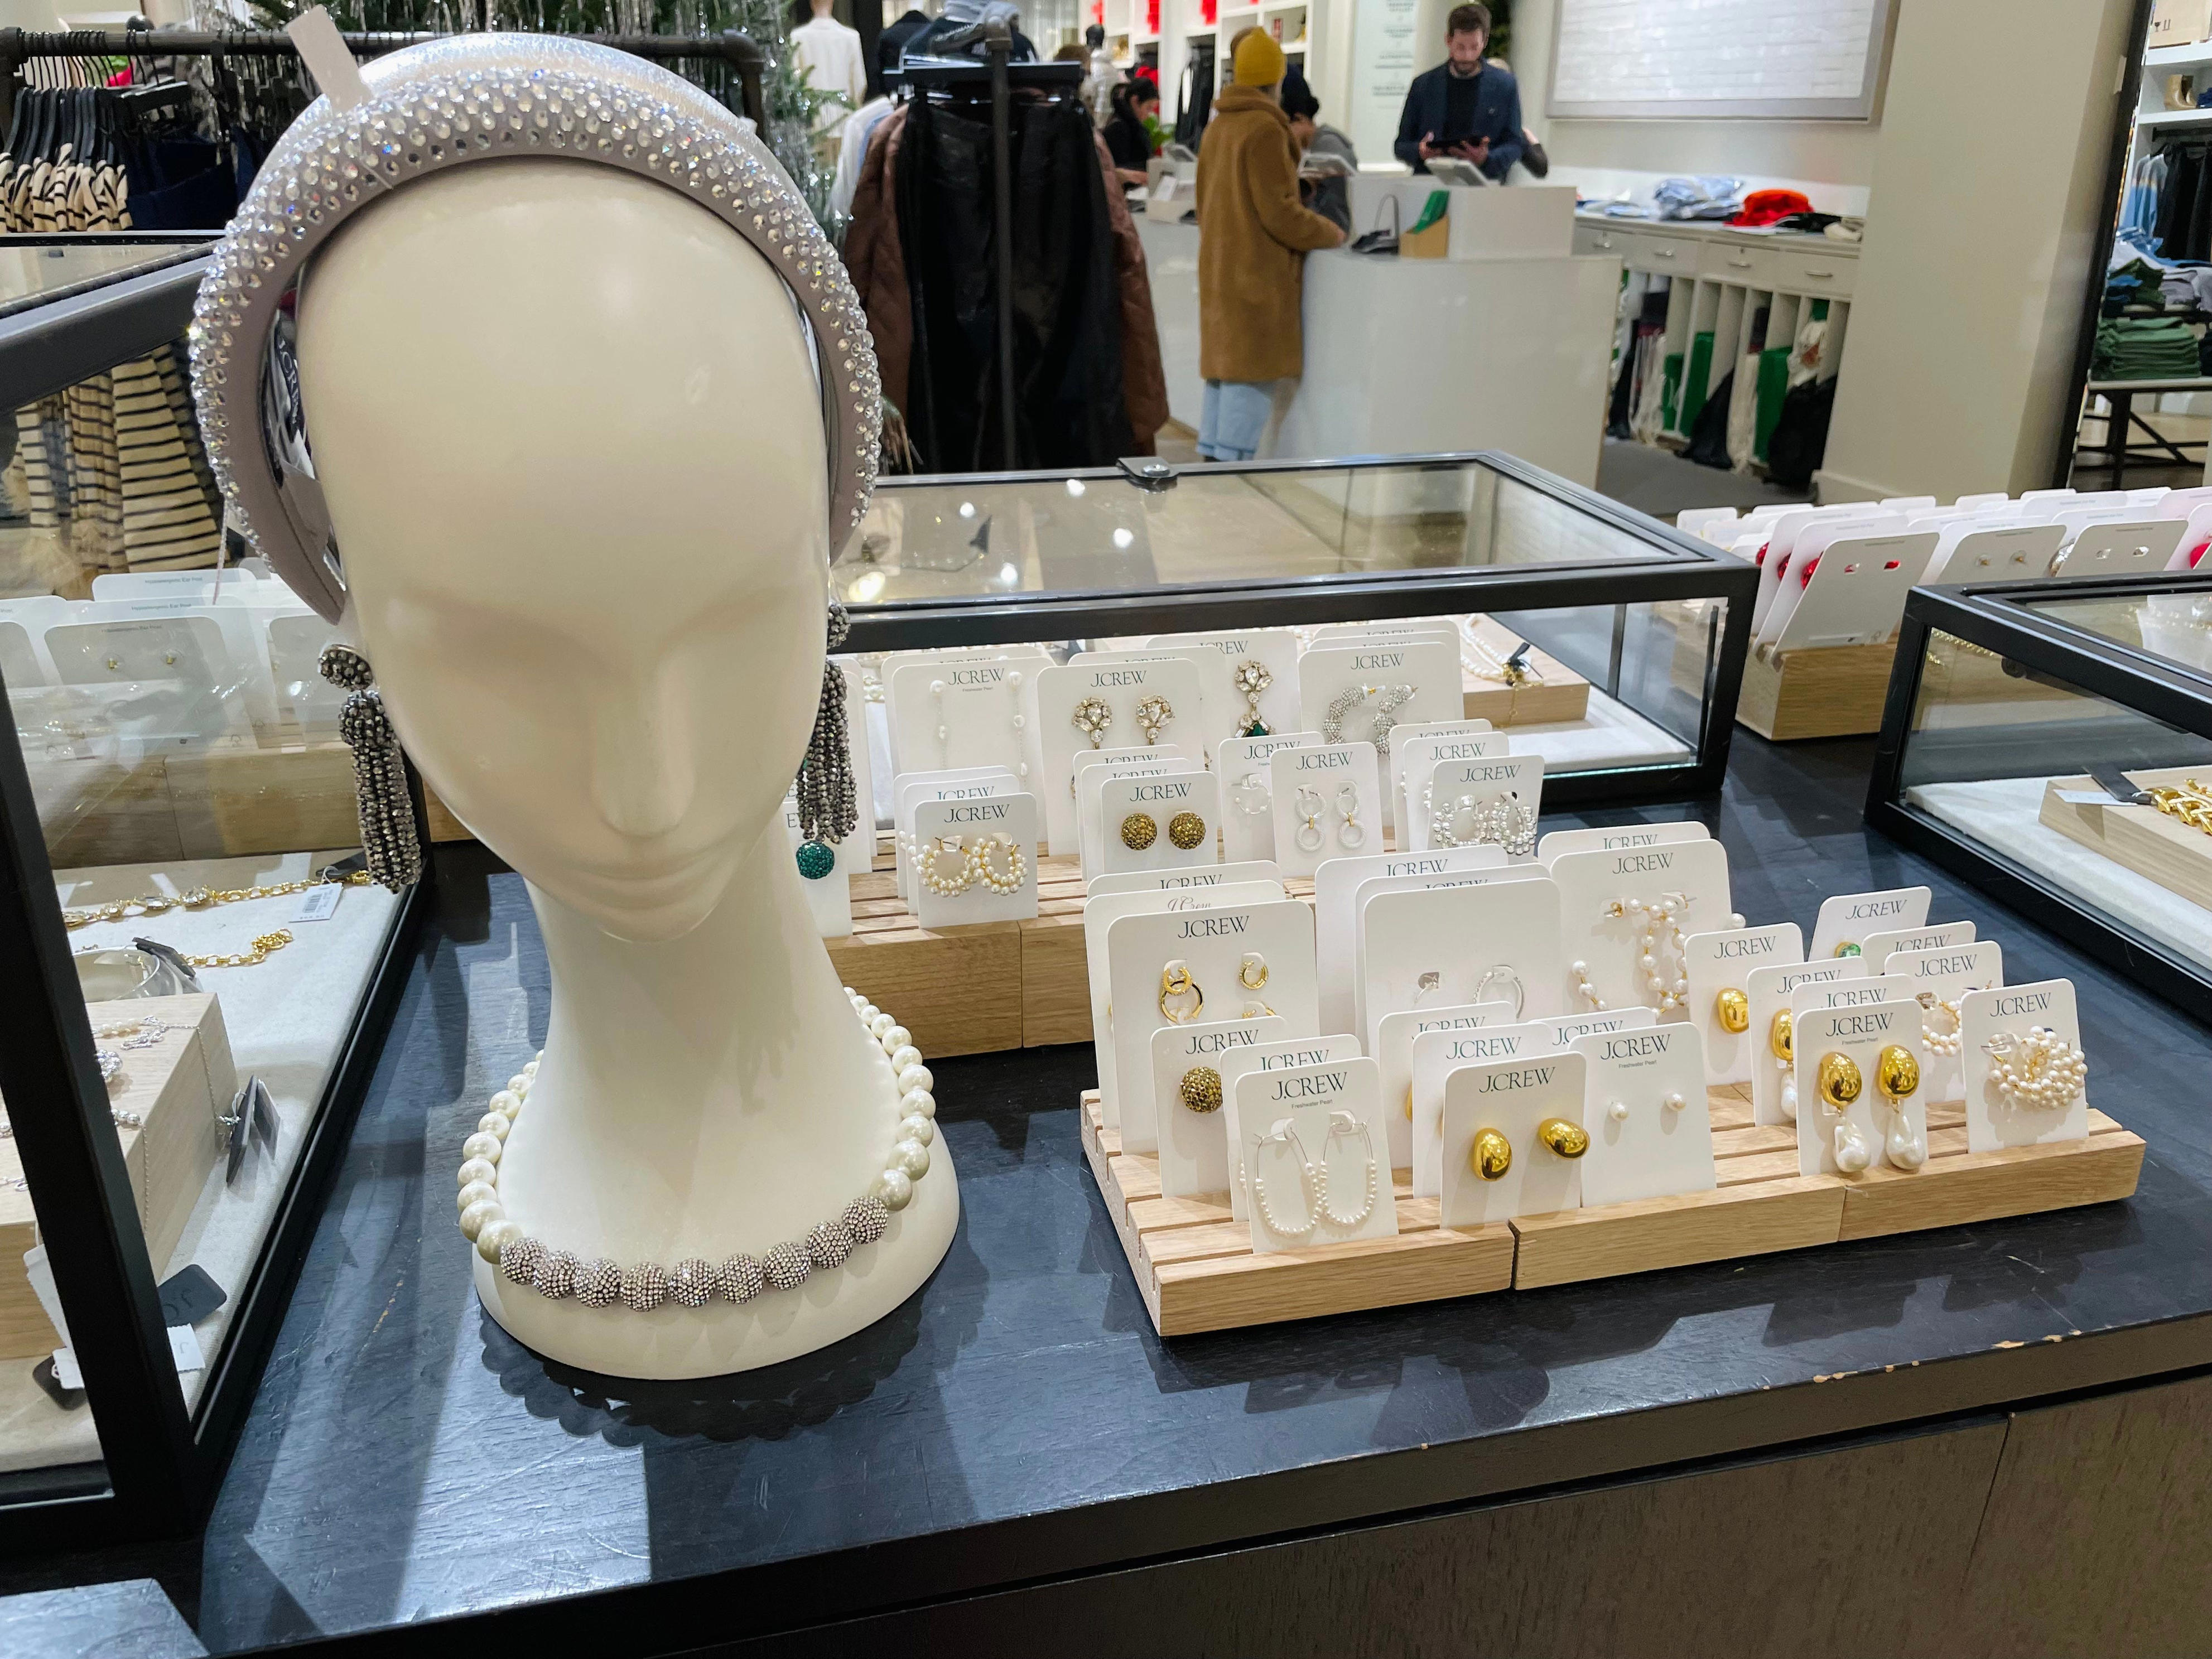 <p>The jewelry was much preppier than the jewelry at Banana Republic.</p>